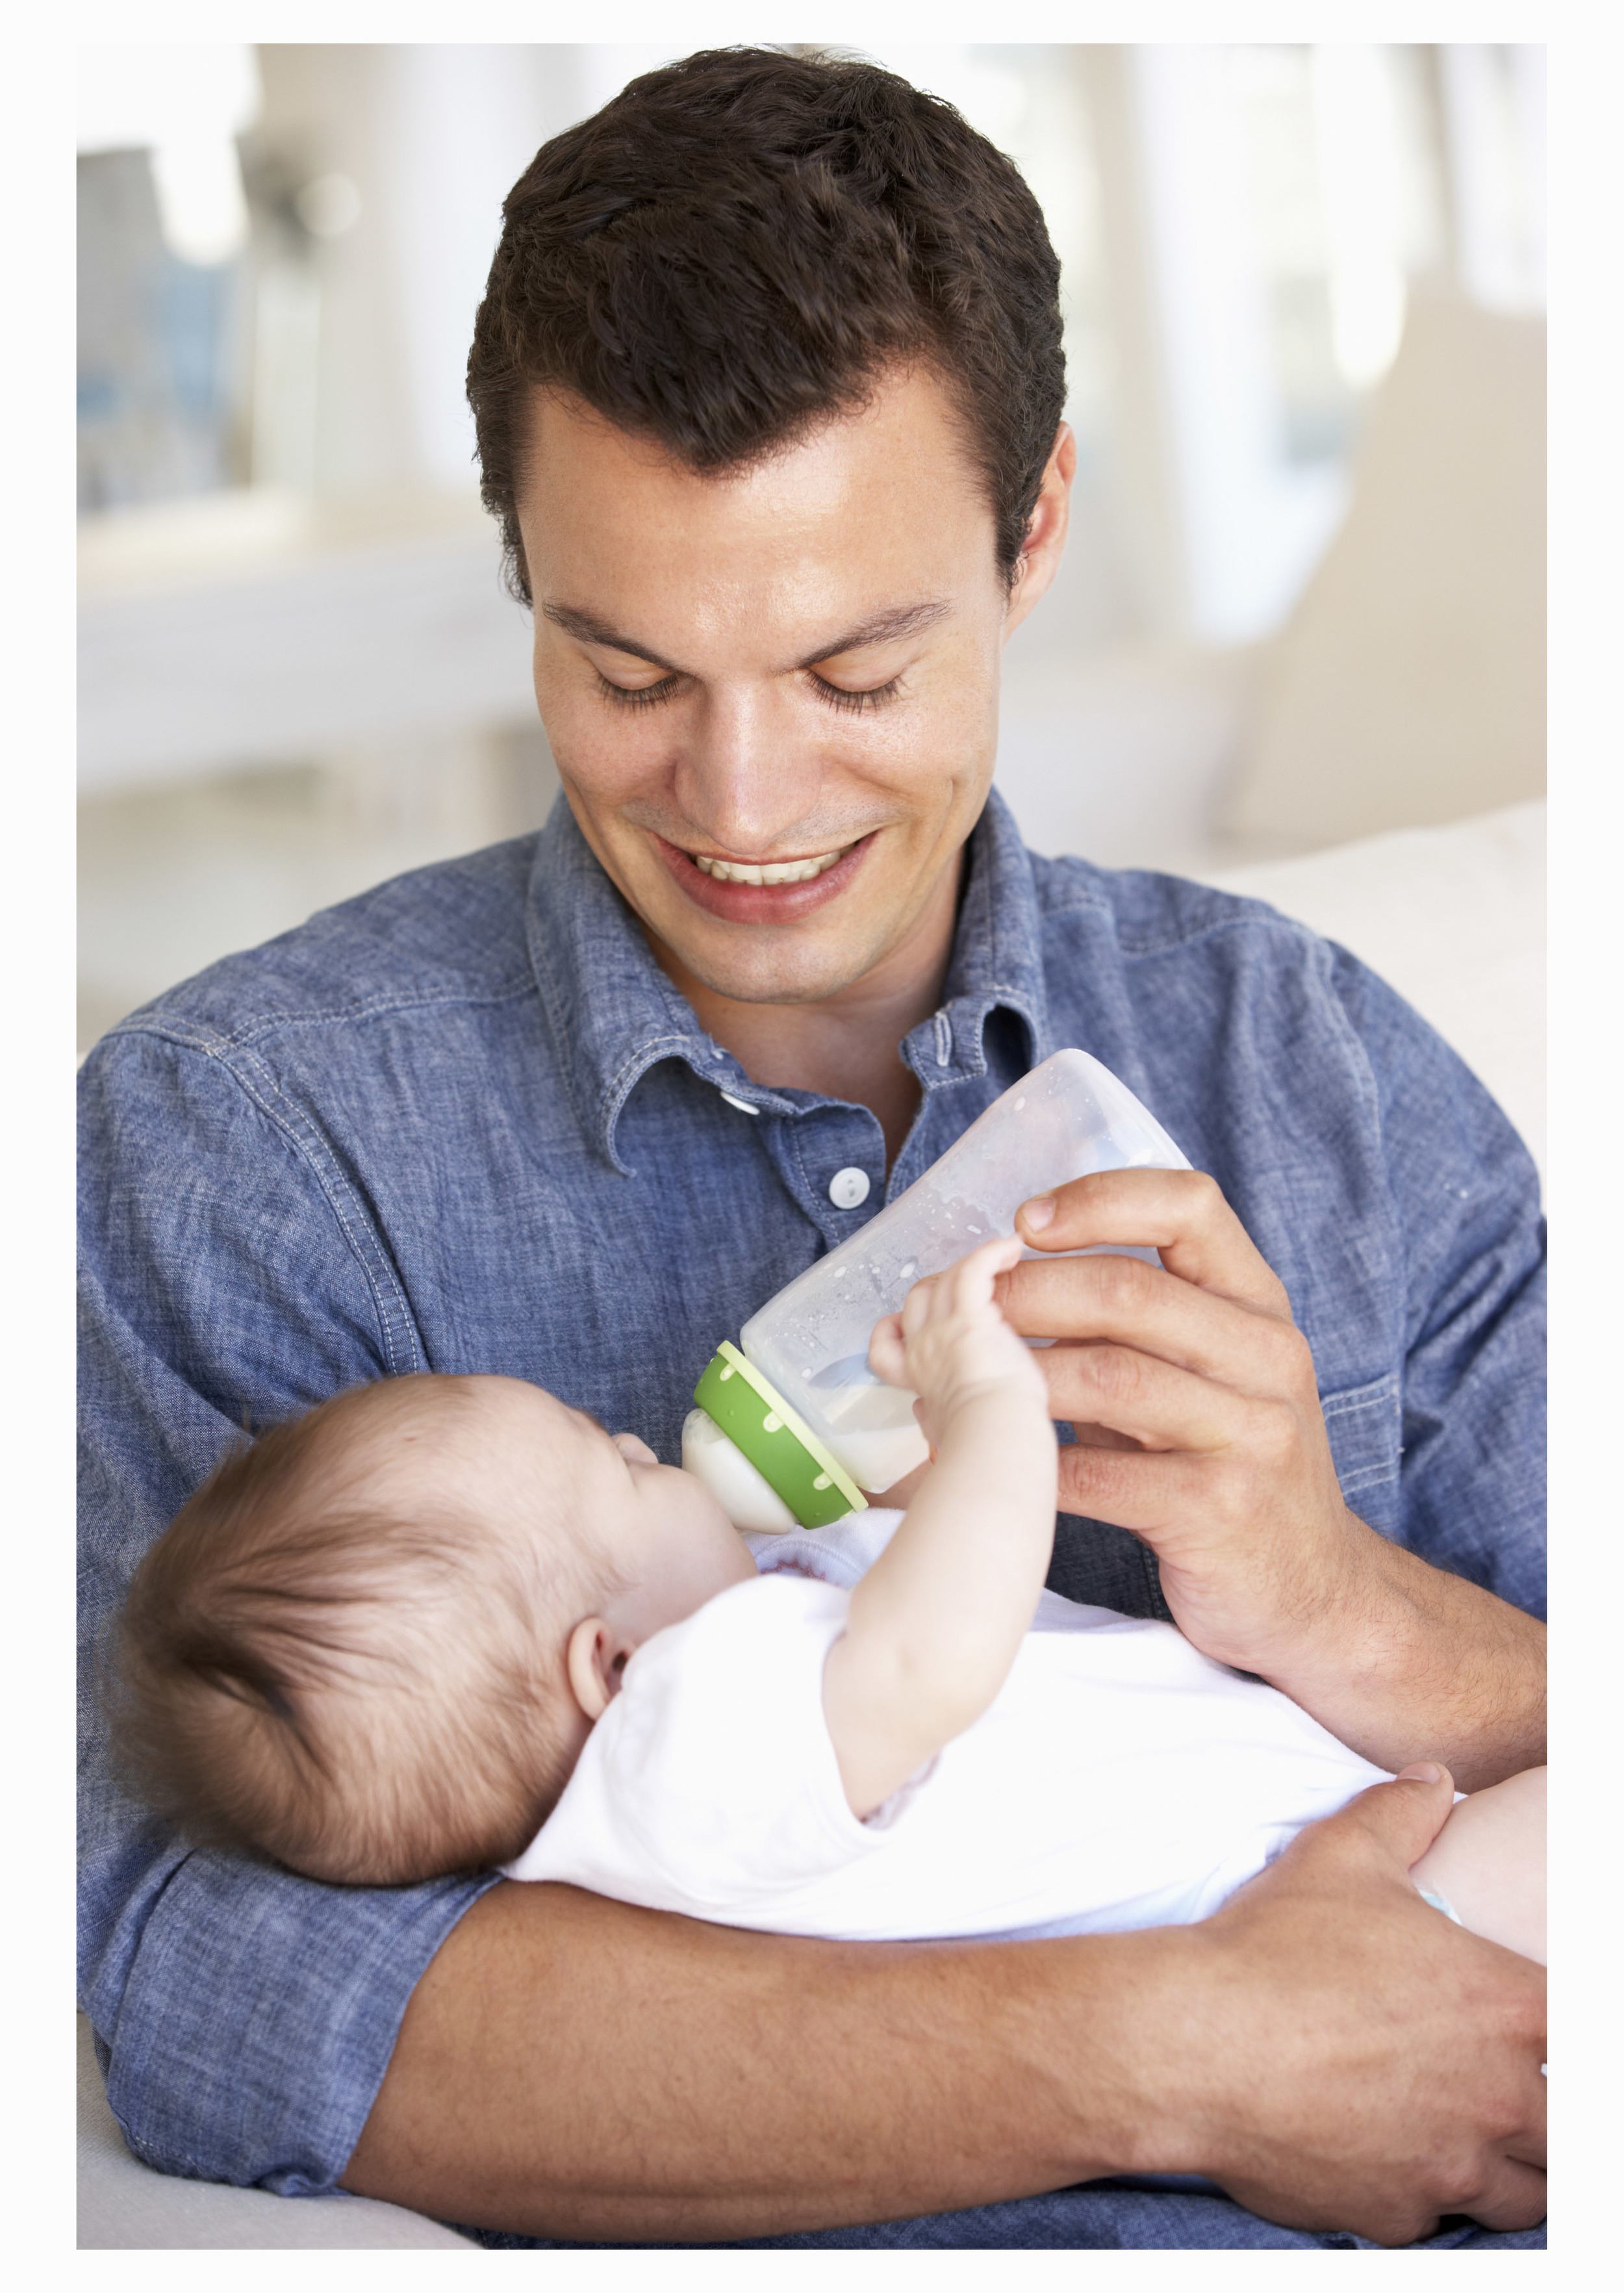 Support with breastfeeding or bottle feeding: our infant feeding